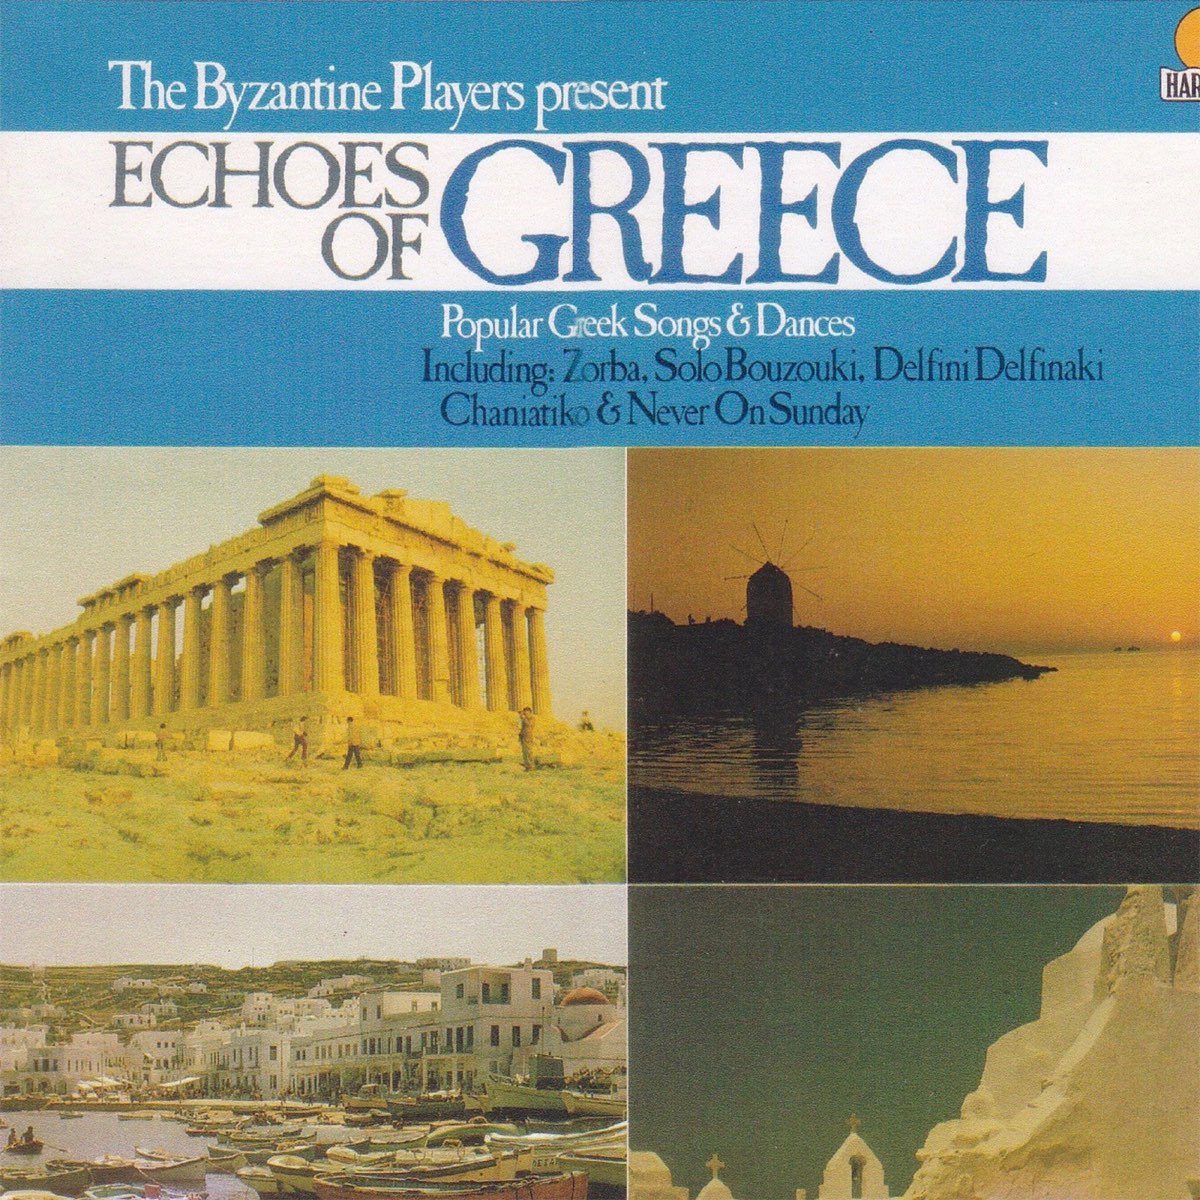 Echoes of Greece by The Byzantine Players on Apple Music